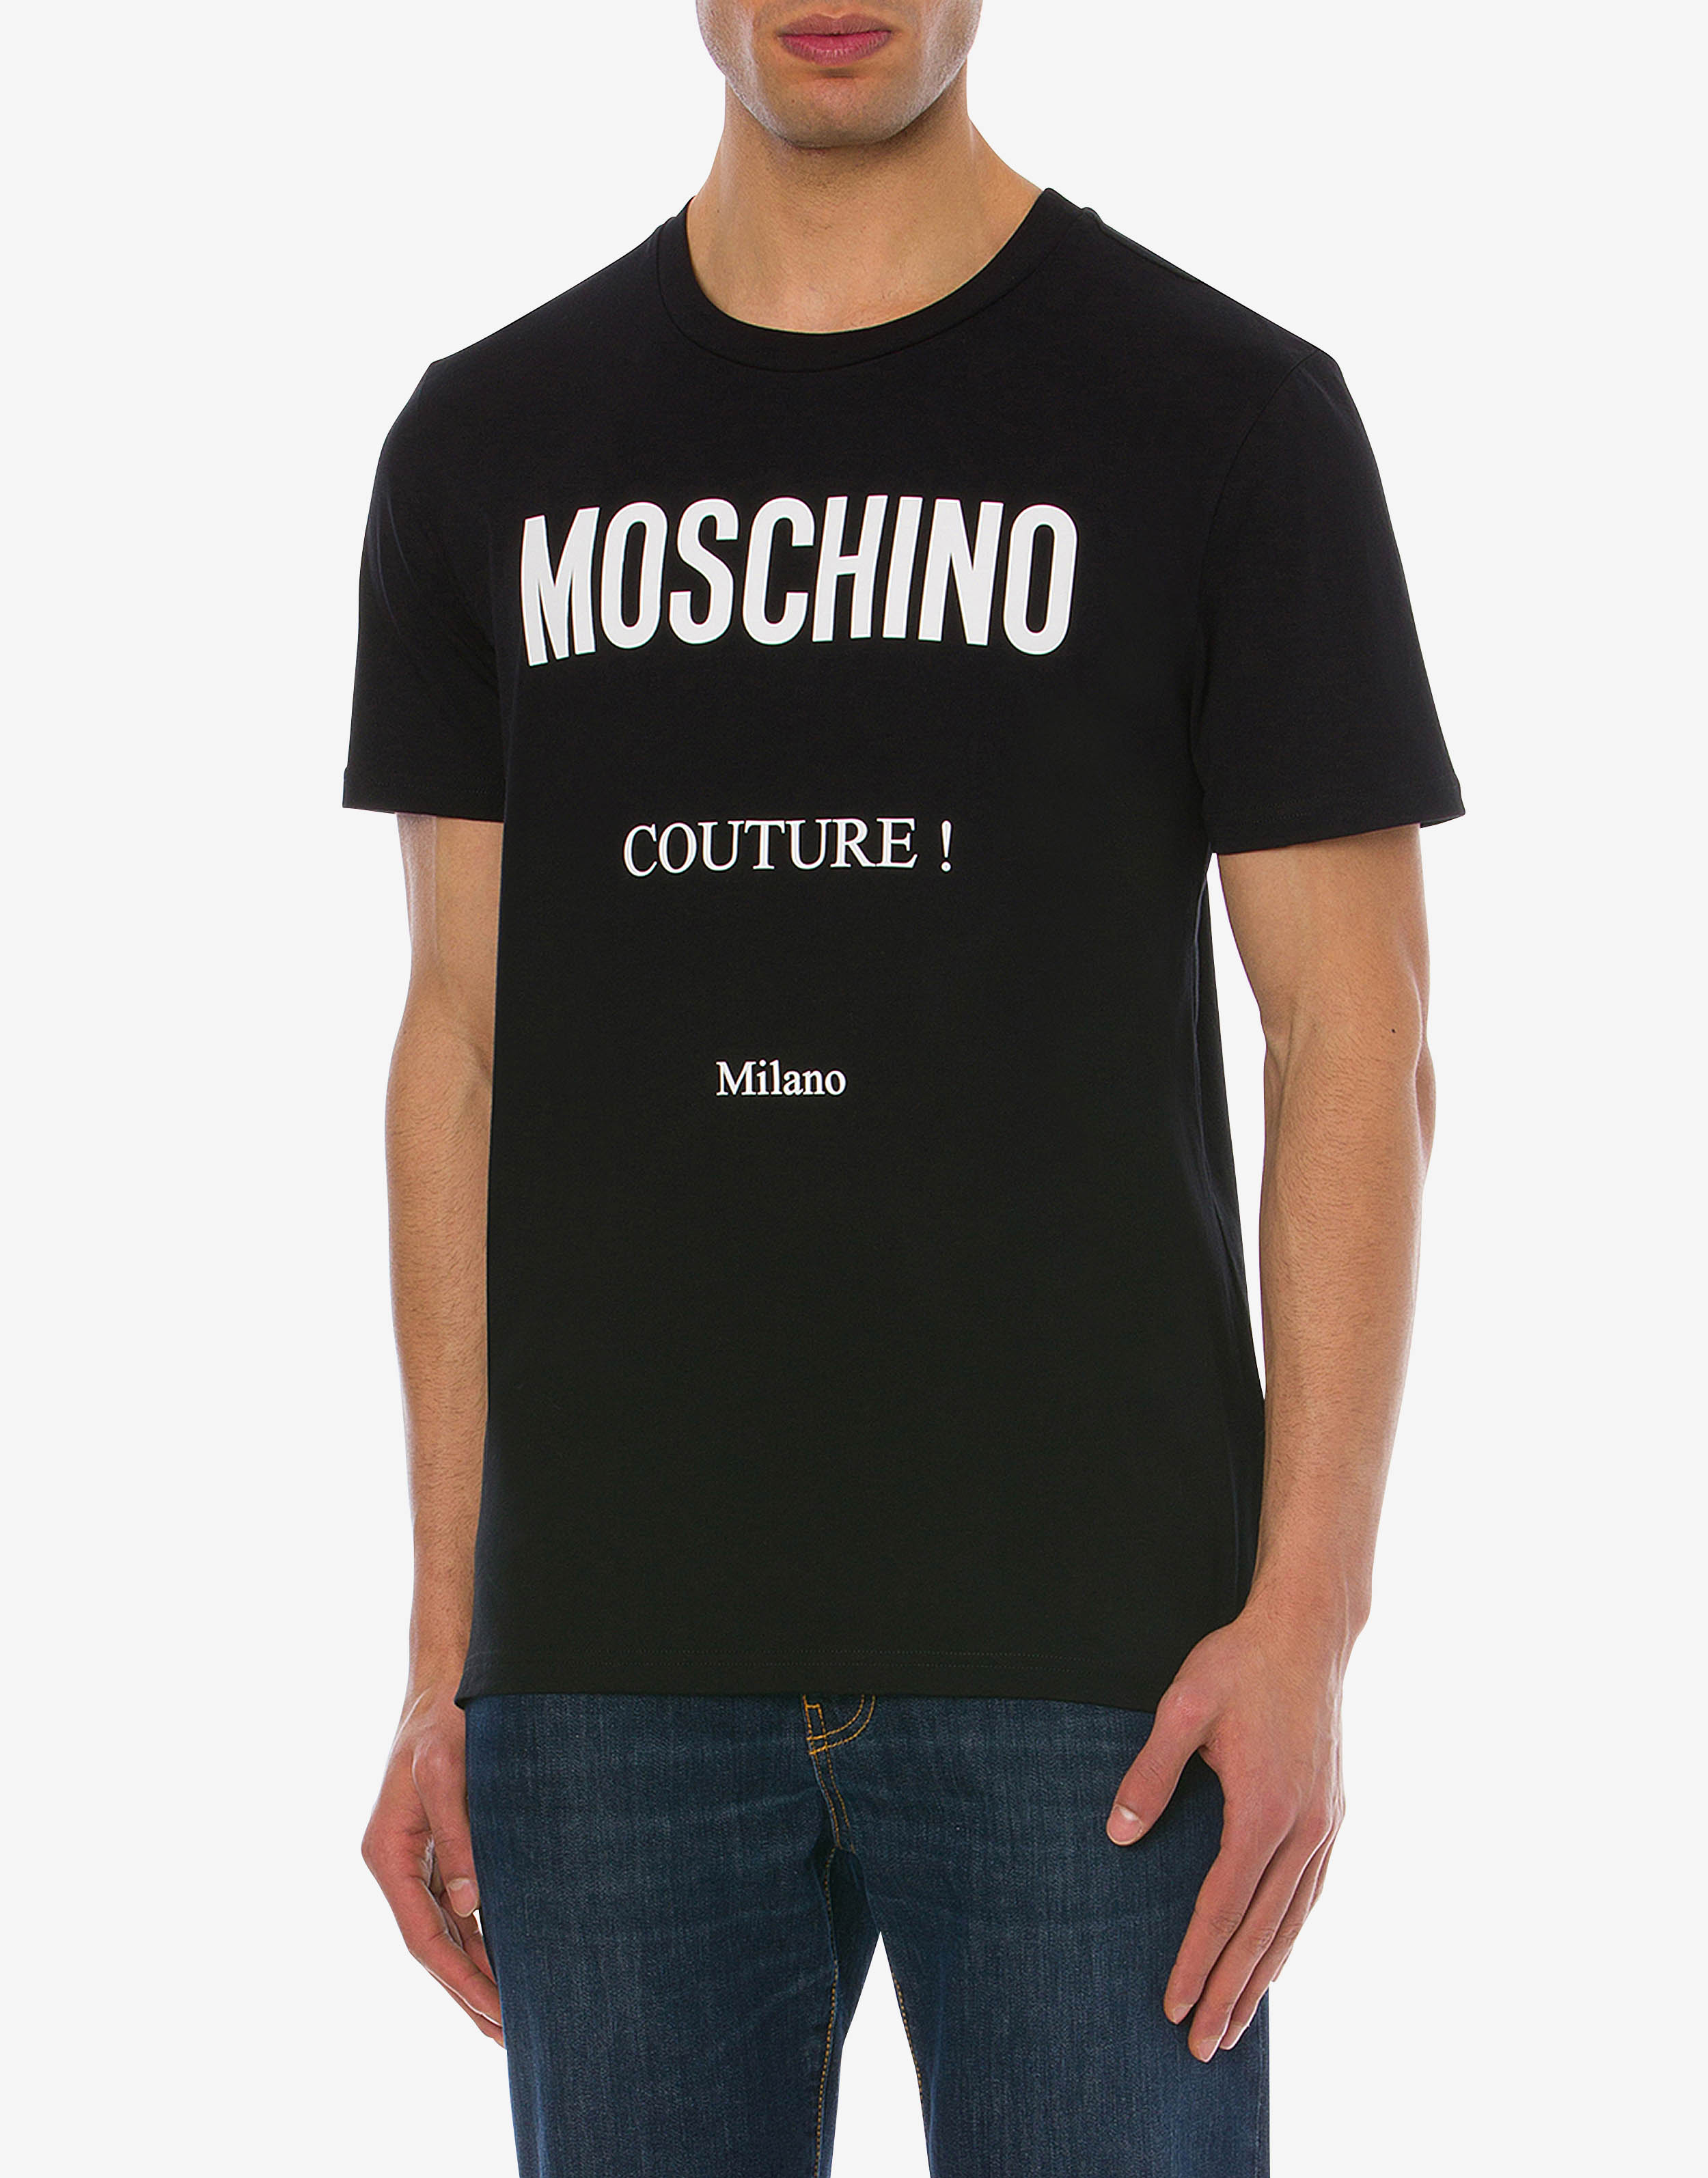 Moschino Store t-shirt Jersey Couture | Moschino Official